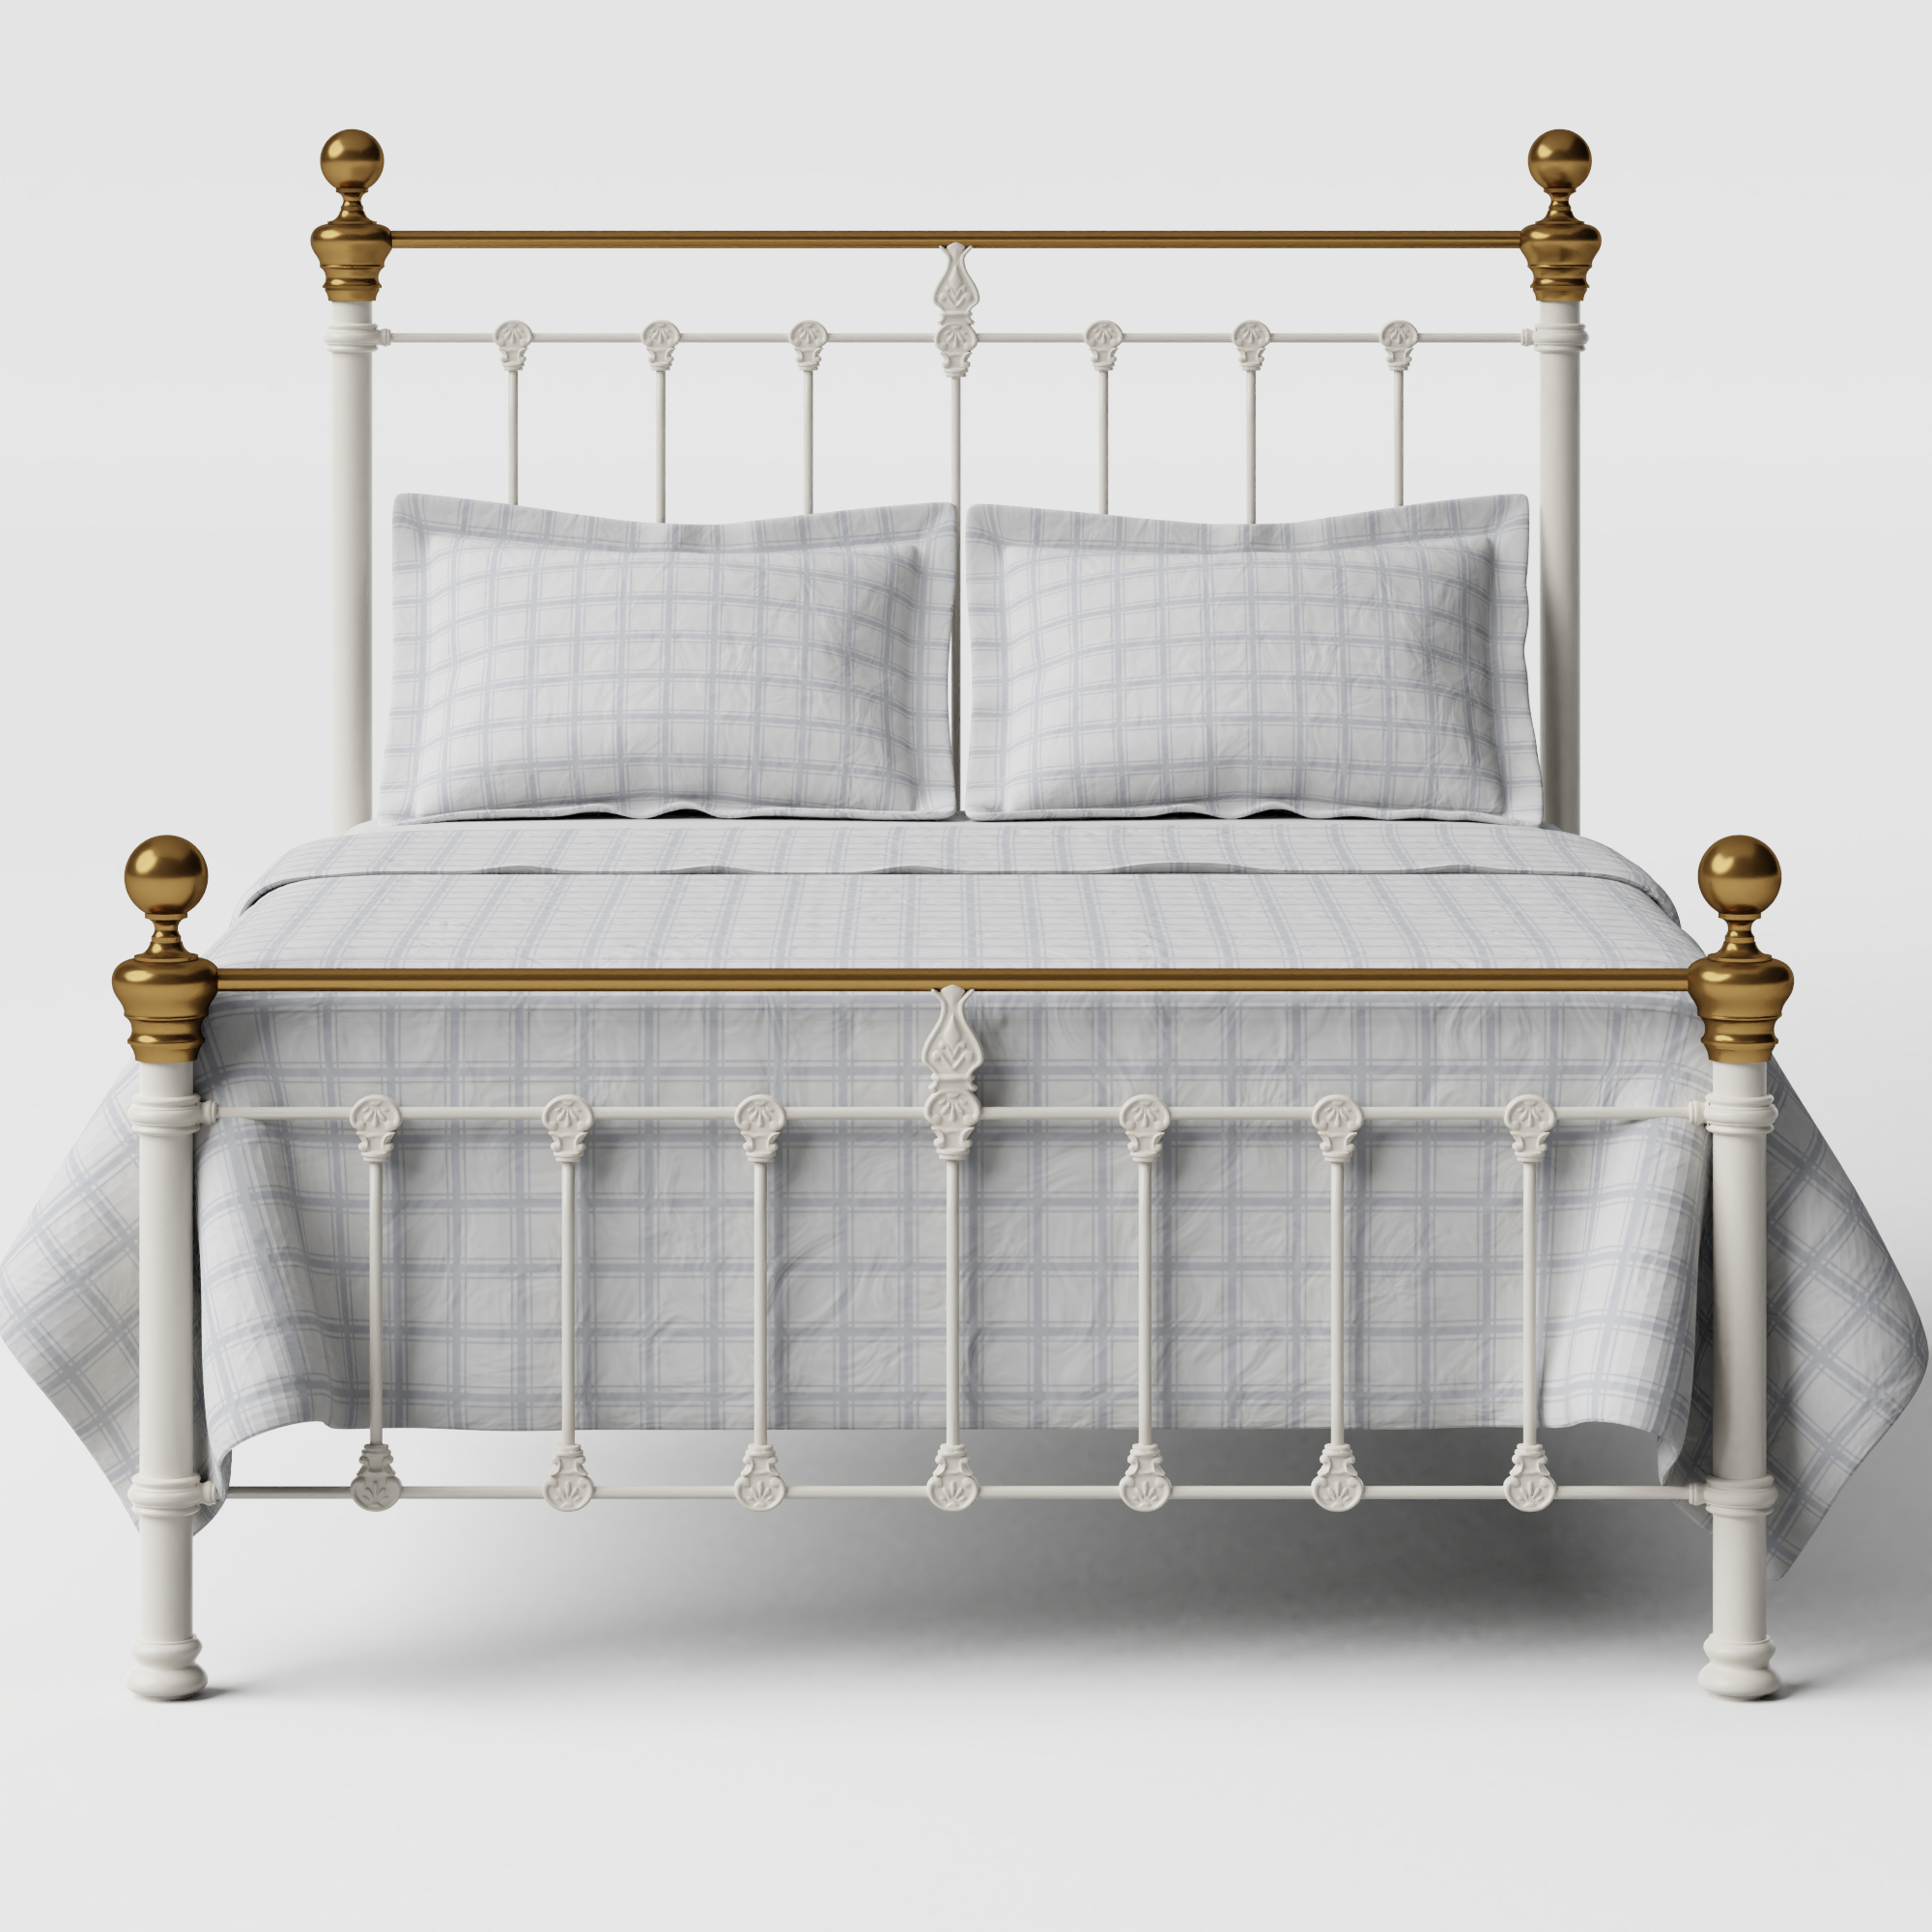 Hamilton Low Footend iron/metal bed in ivory